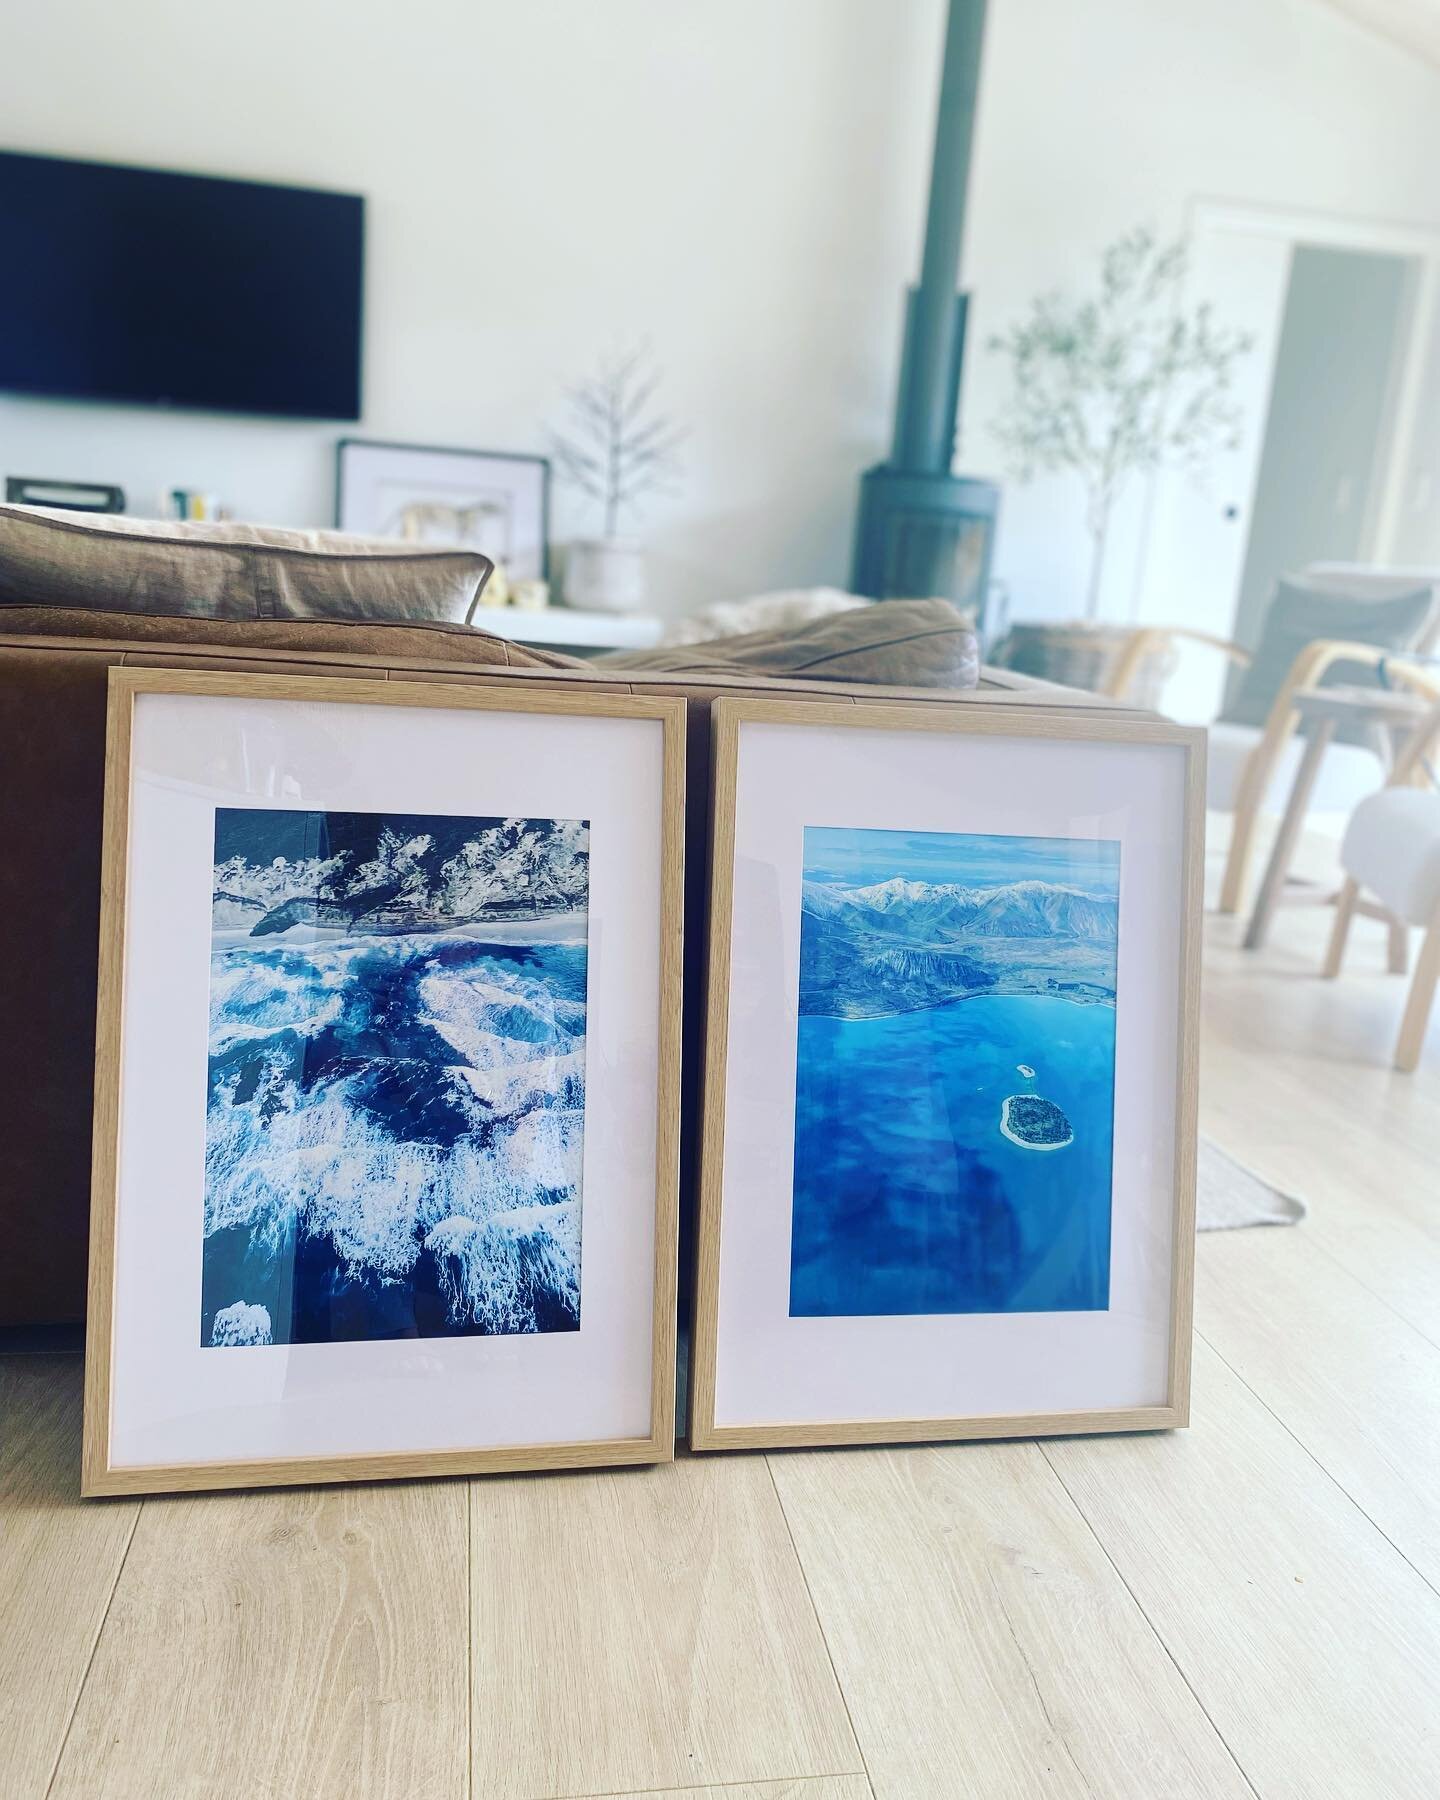 S T E W Y + T E K A P O taken by us during flights with good friends @jericho_station &amp; @harrietbremner such special memories, can&rsquo;t wait to hang these two beauties in the office! ✈️ 🏖 
&bull;
&bull;
&bull;
#laketekapo #stewartisland #joyr